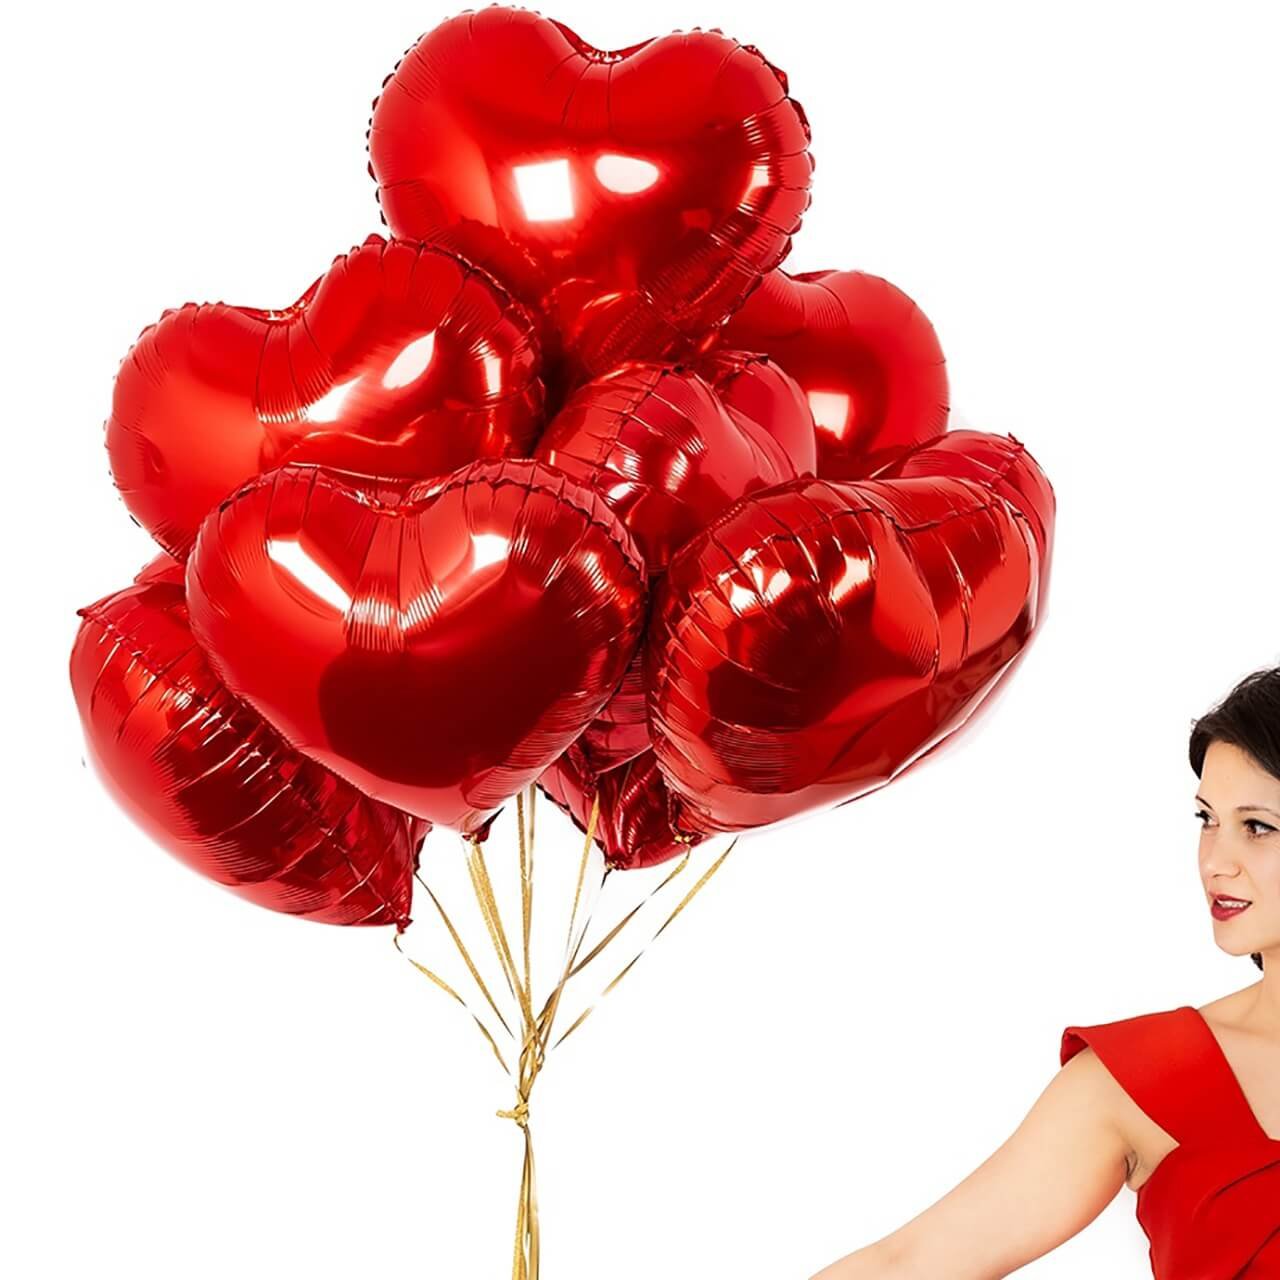 Valentine's day special red heart shaped helium balloon s